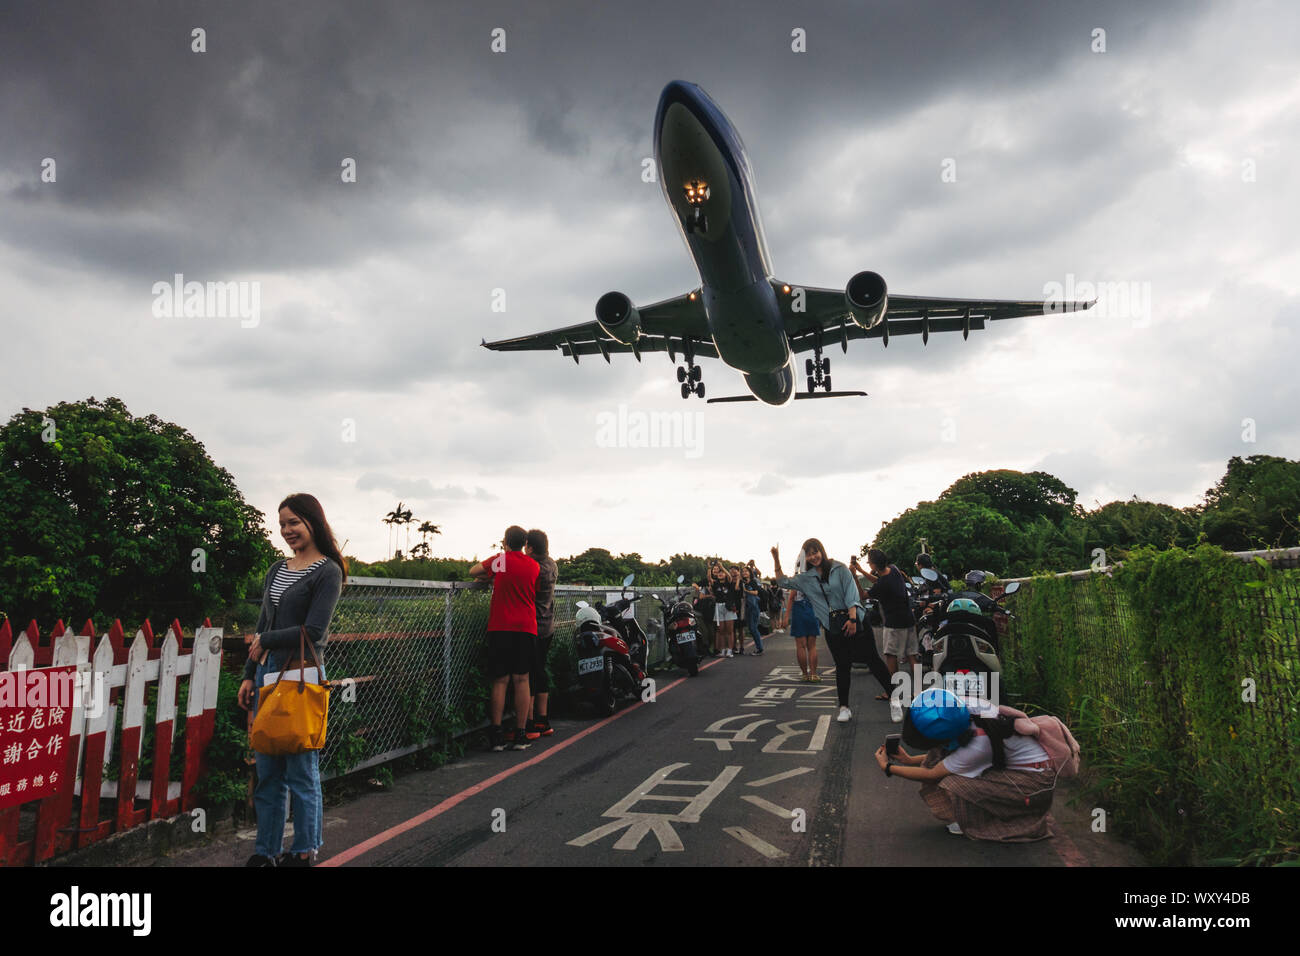 Sunset at "Airplane Alley" - people pose for photos as an Airbus A330-300 flies low over their heads on approach to Songshan Airport, Taipei Stock Photo